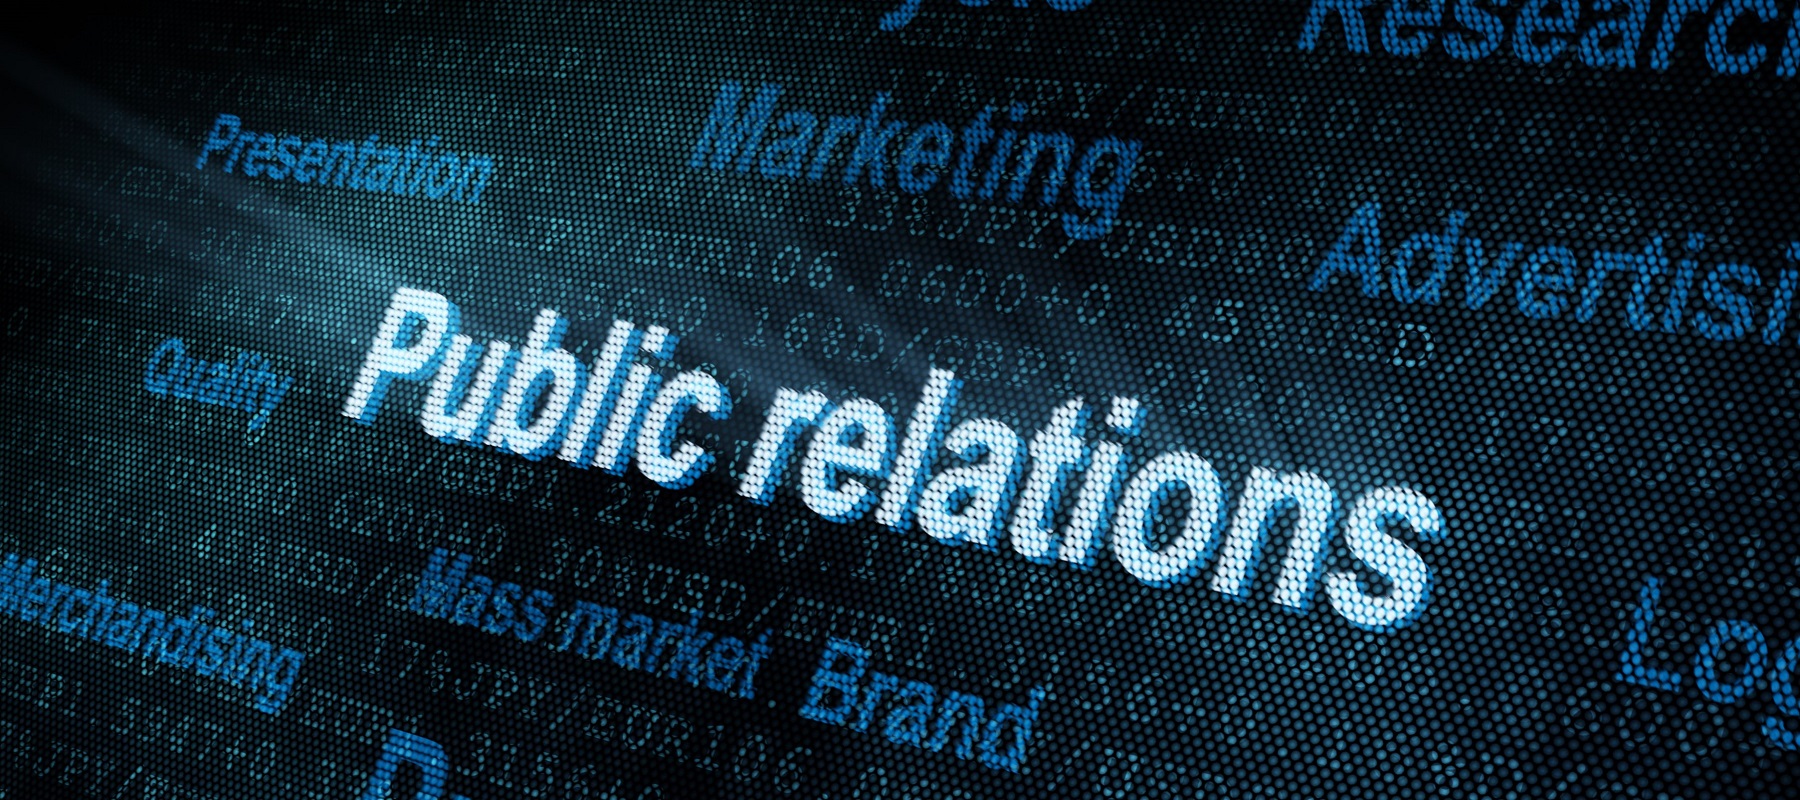 Global public relations tools market to reach $29.5 billion by 2030, report